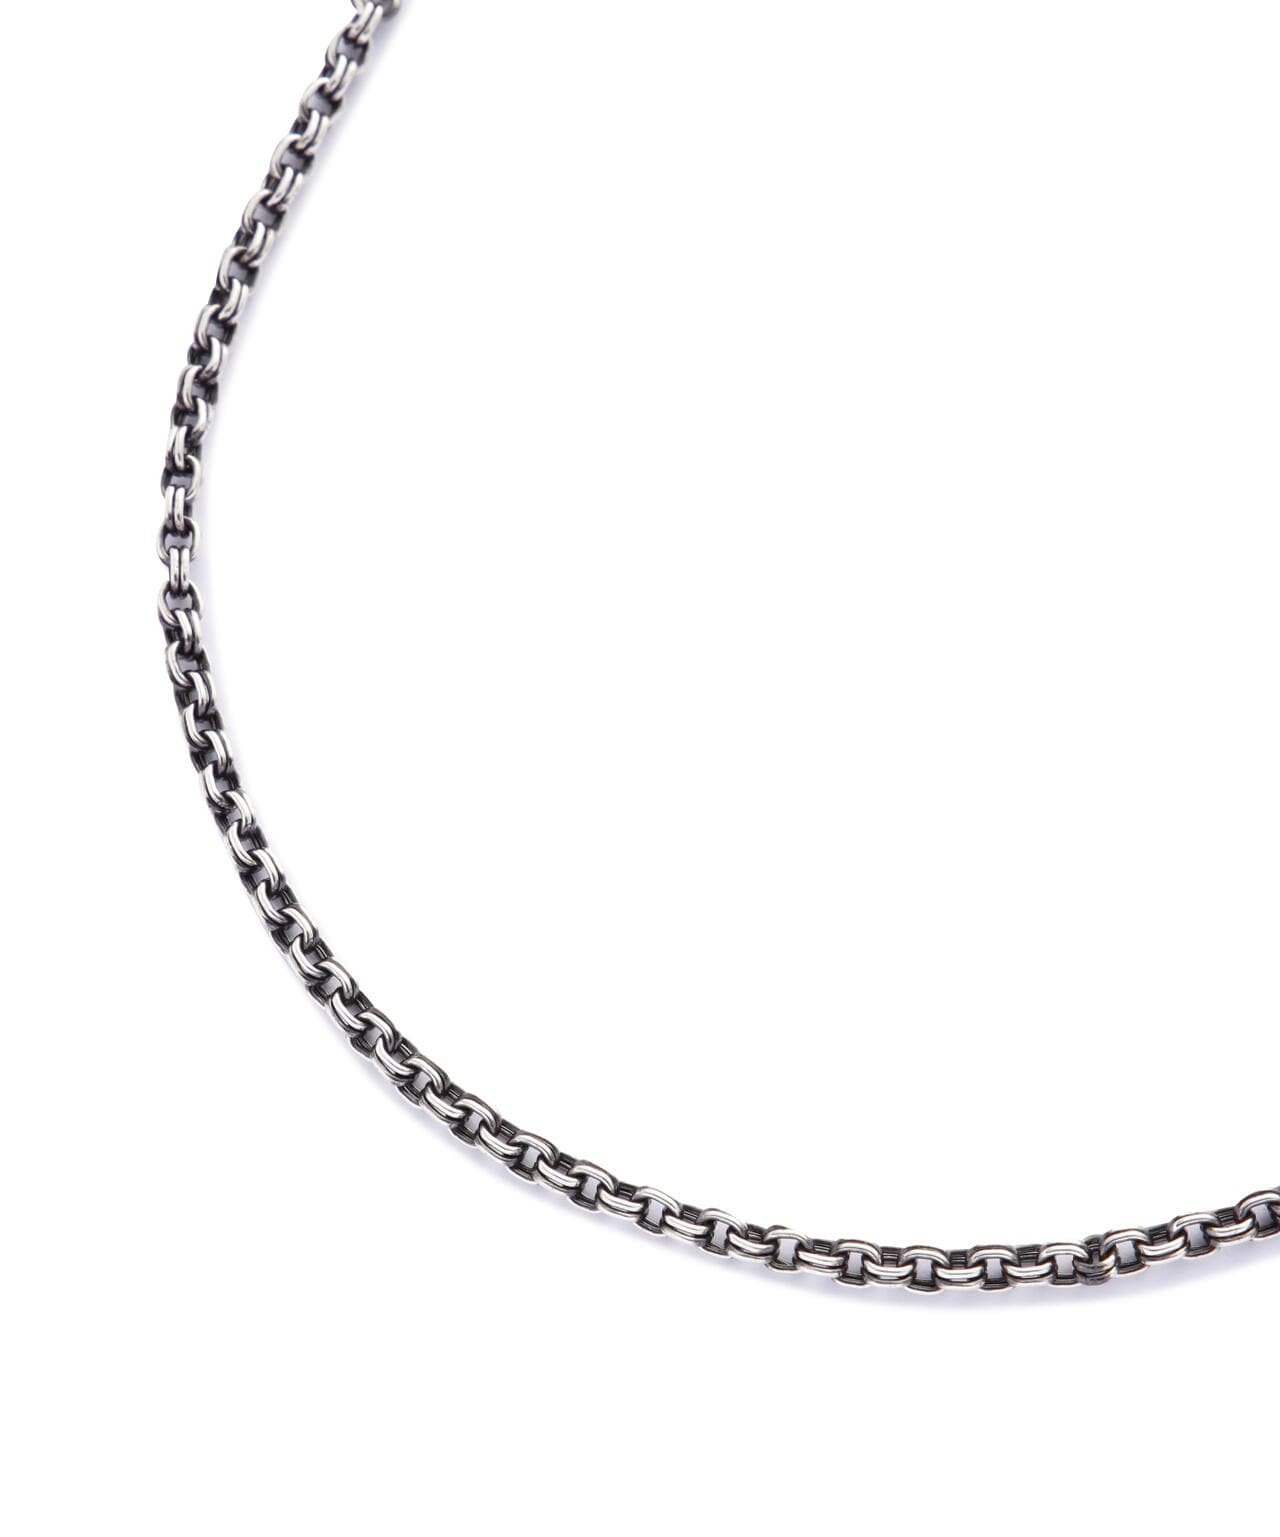 meian/メイアン/STERLING SILVER DOUBLE LINK CHAIN NECKLACE/ダブル 